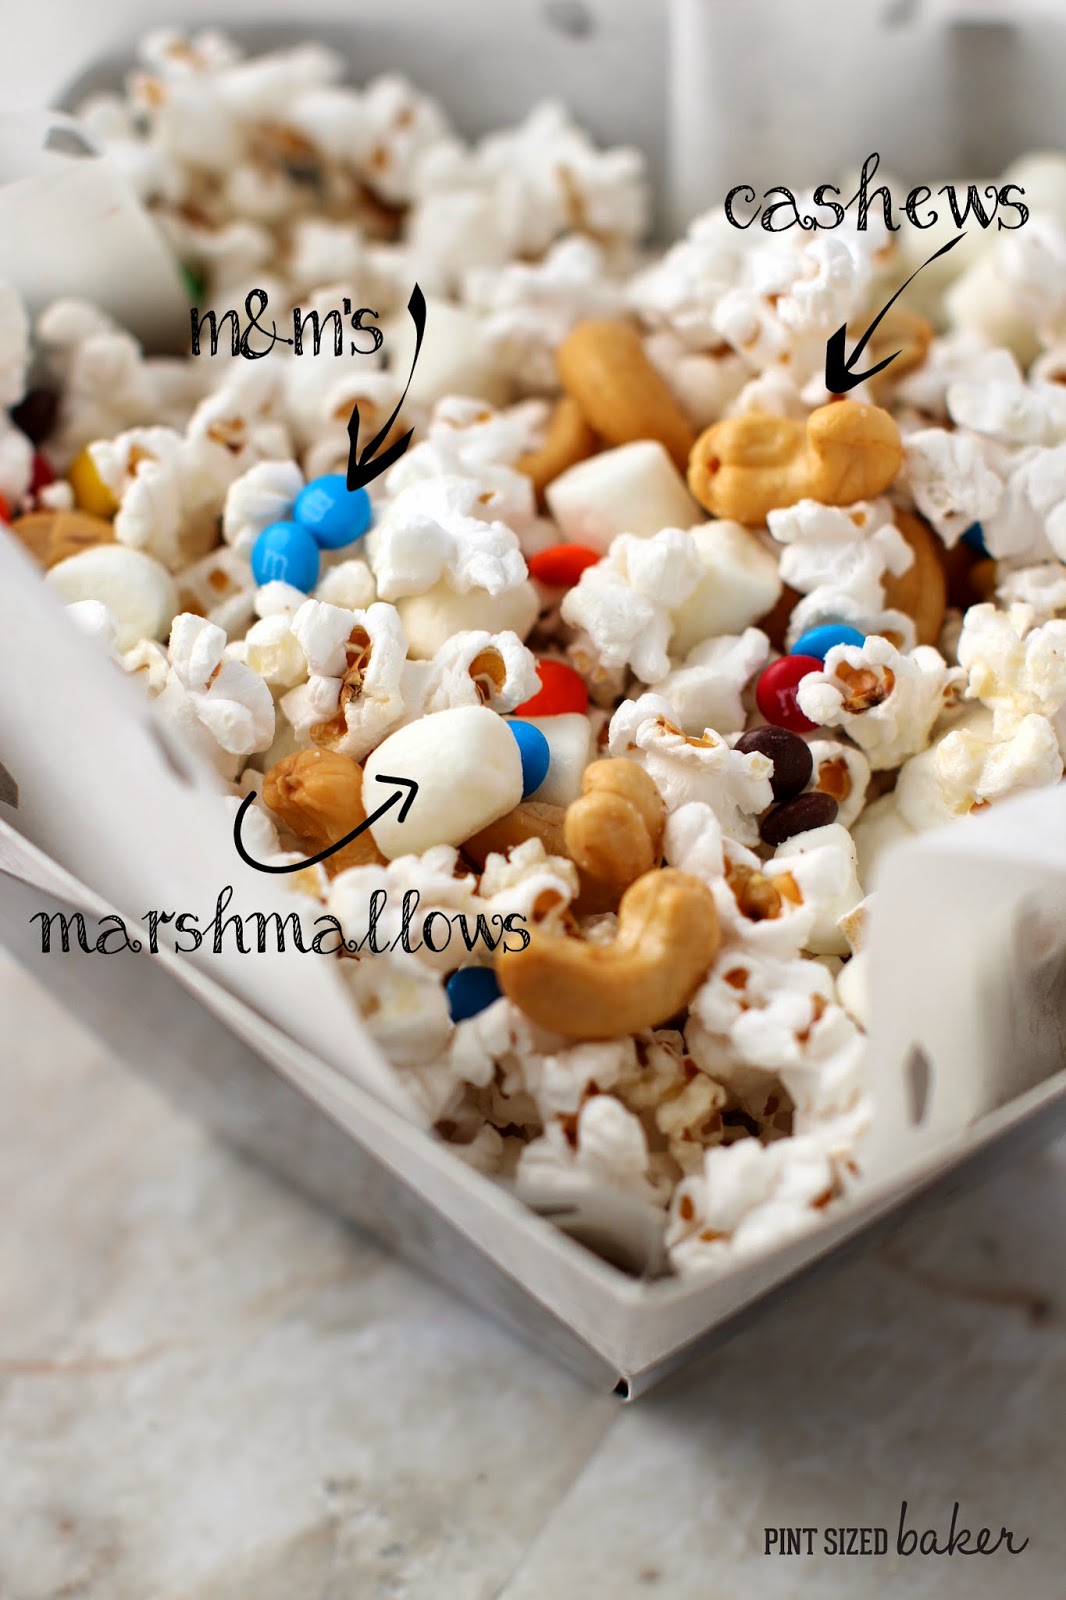 Popcorn mixed with Salty Cashews, Sweet mini marshmallows and M and M's and tossed with butter. A quick and easy snack!